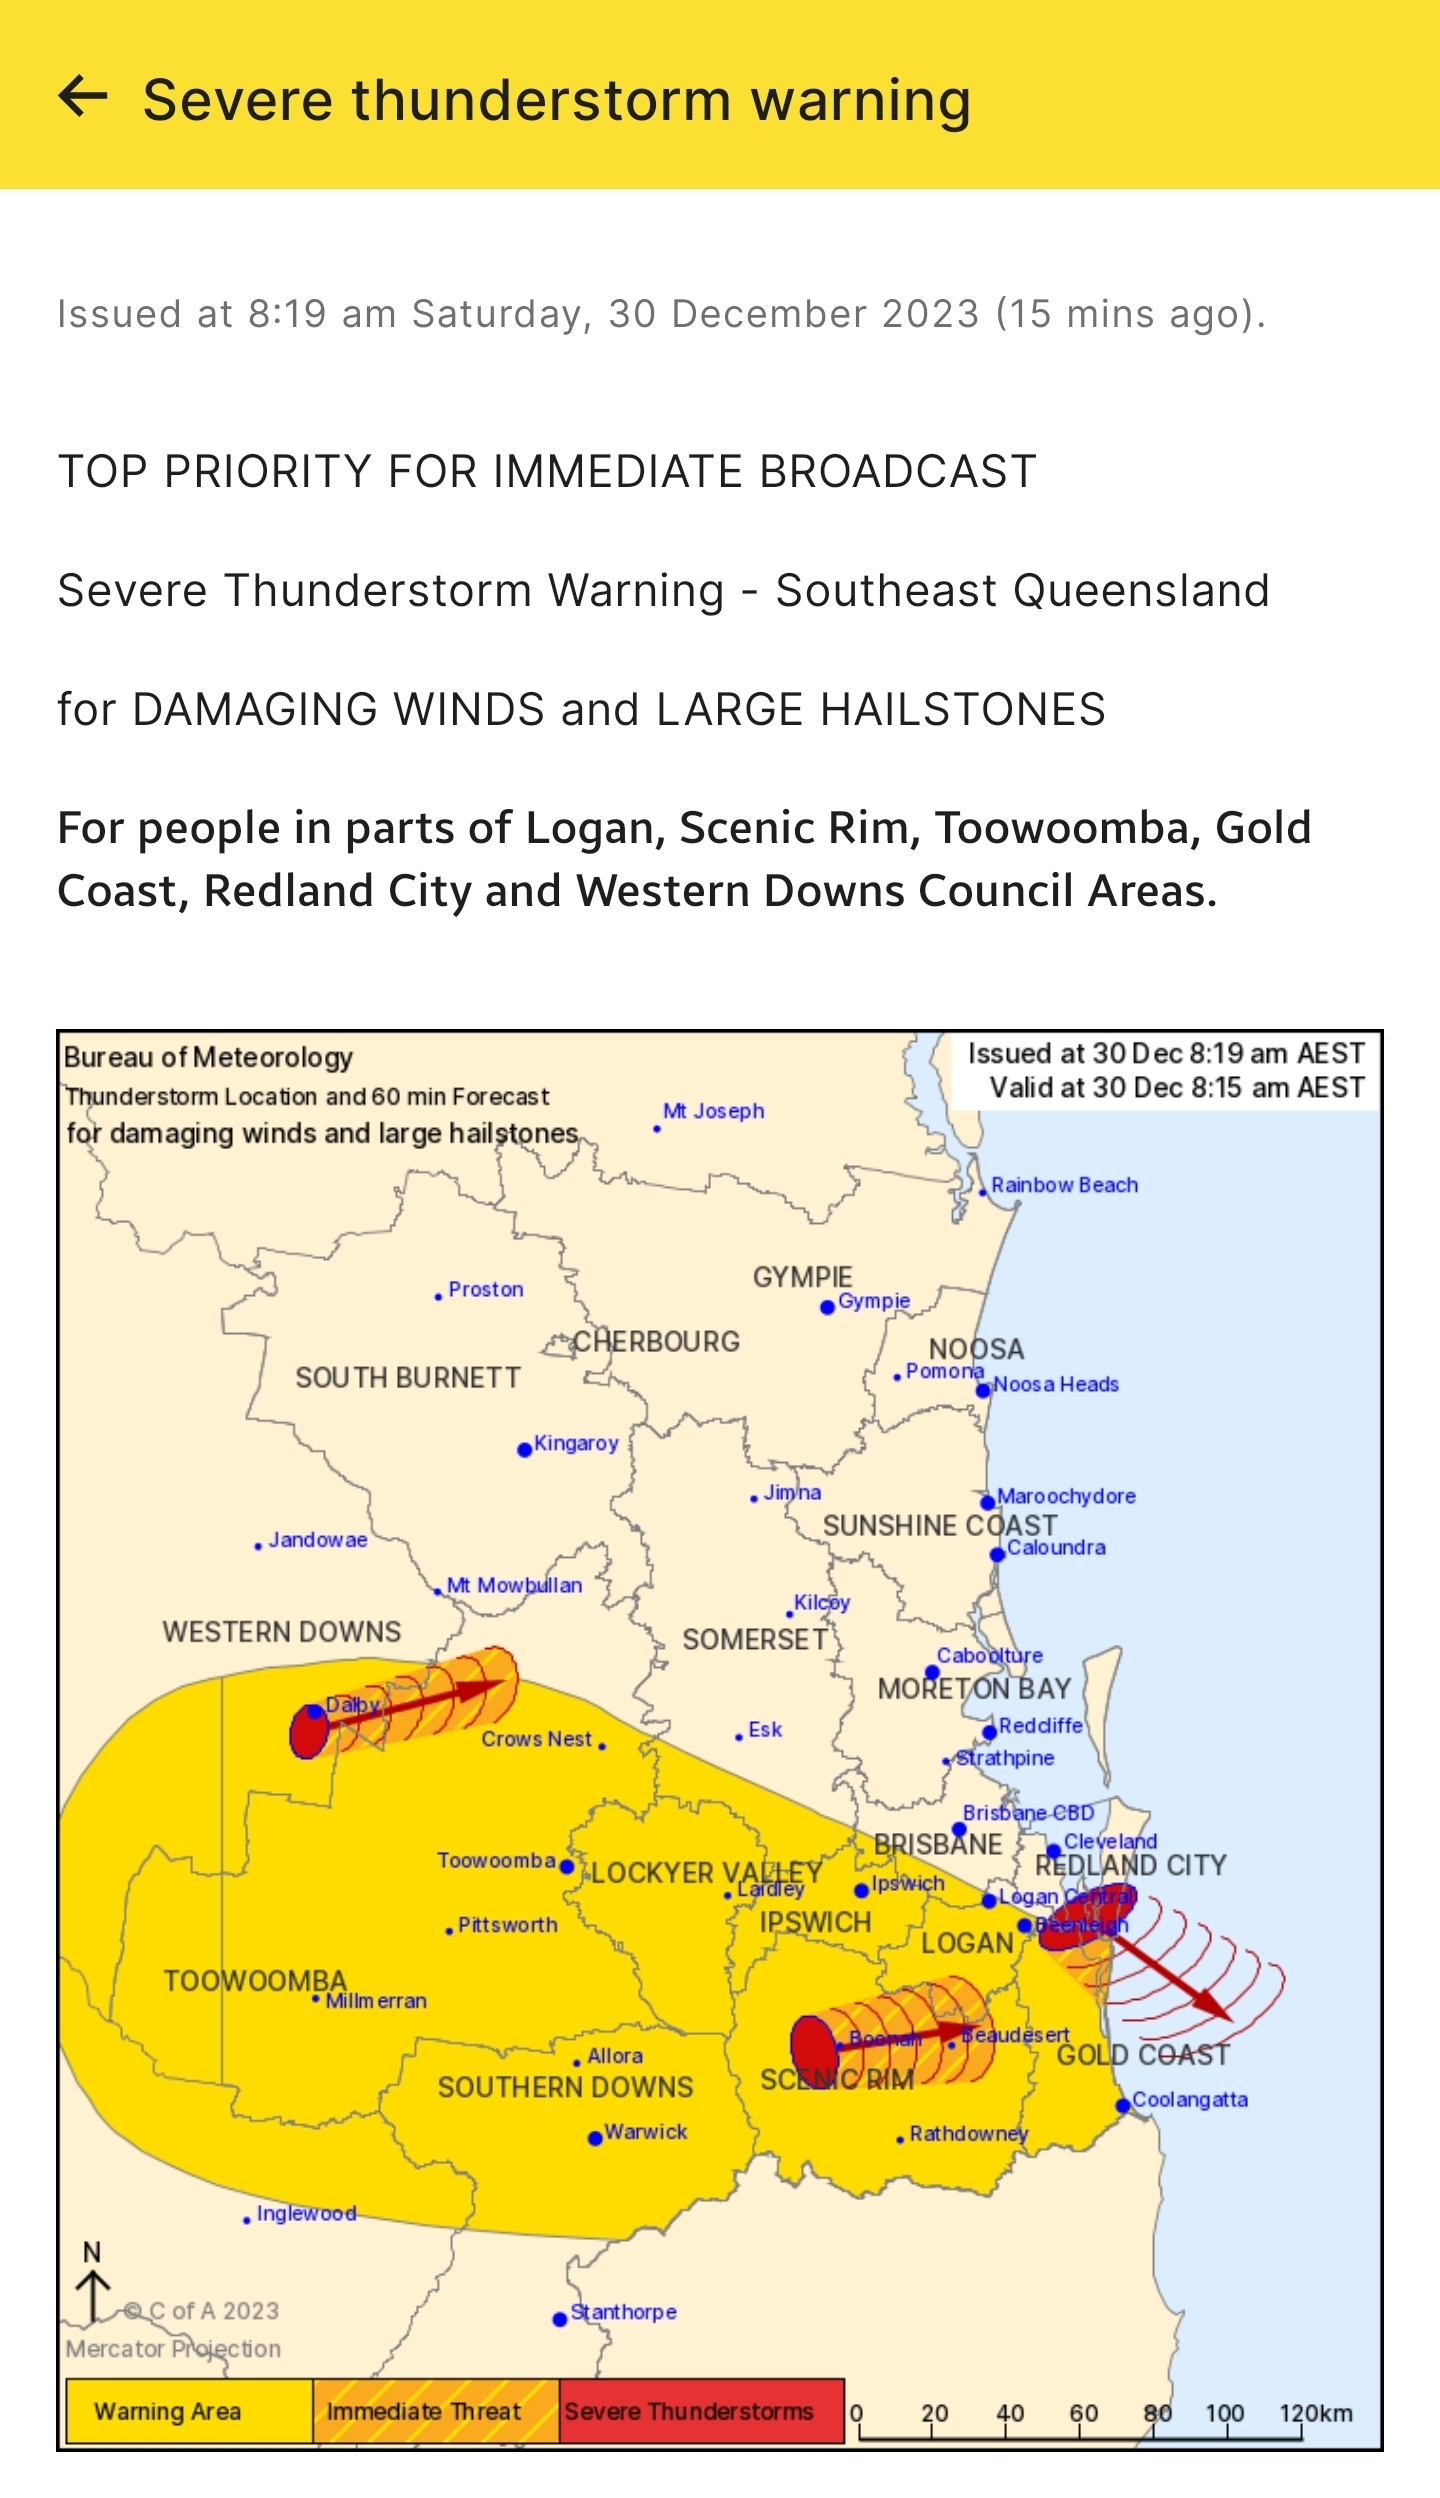 Image from the BOM of a storm warning and affected areas.